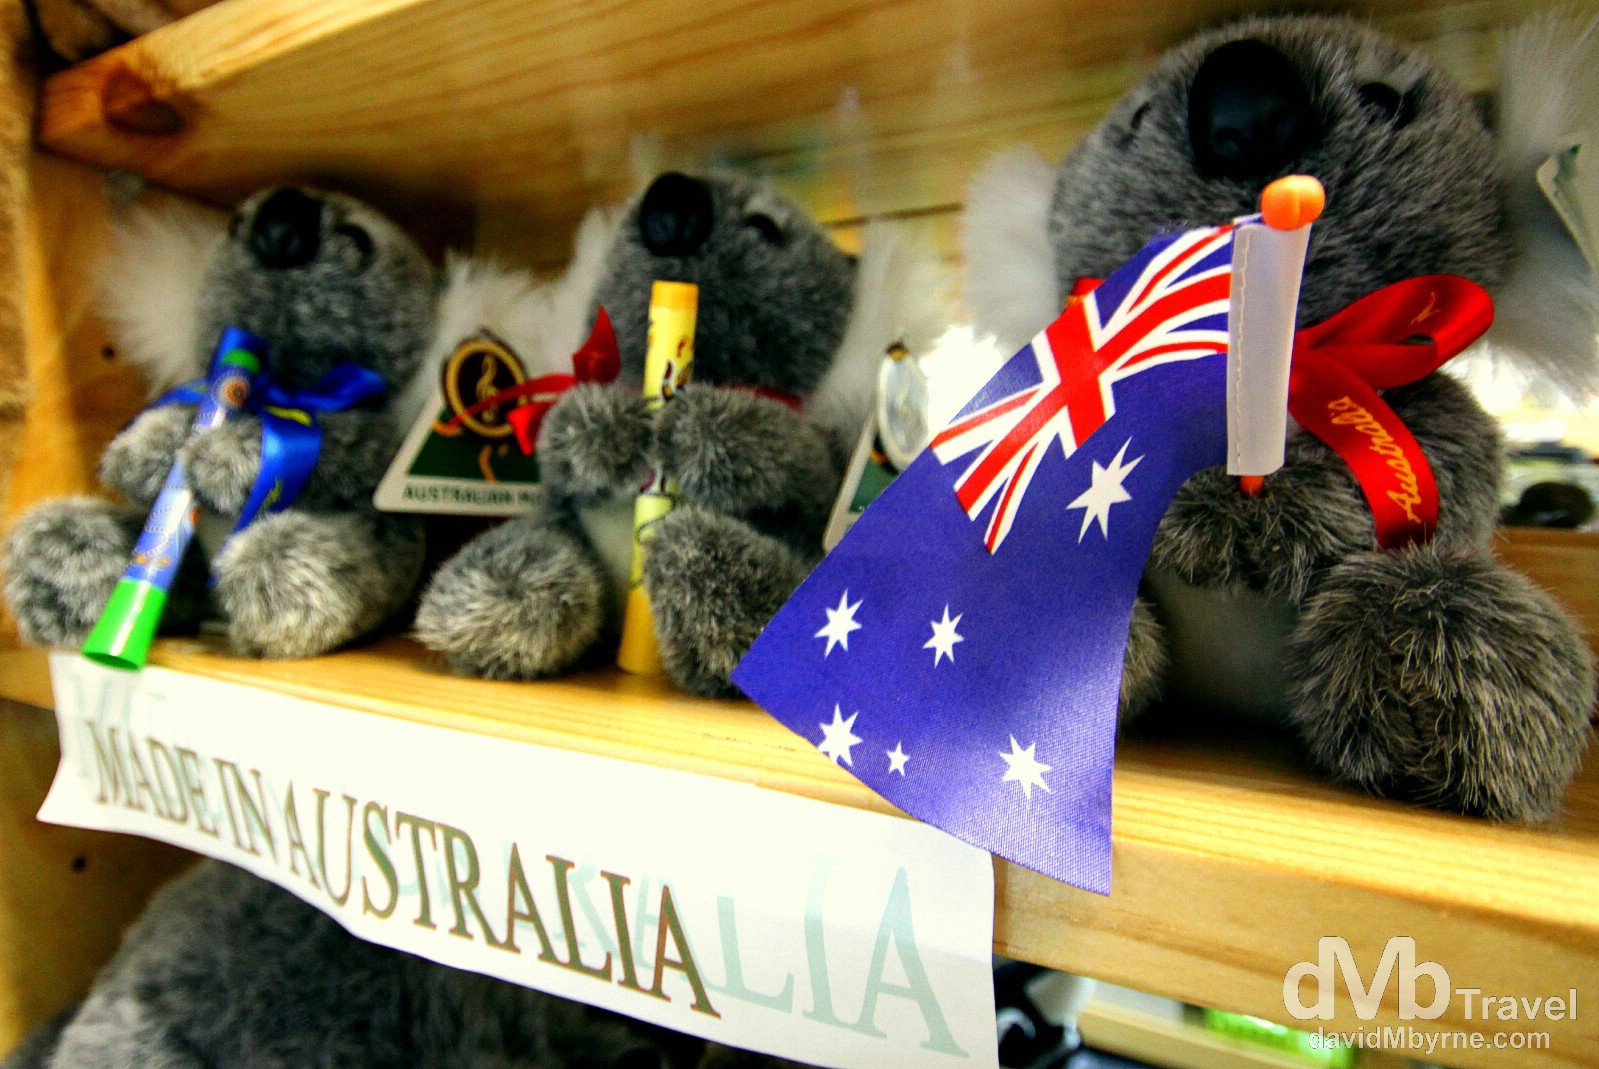 The Sunshine Coast isn’t just about beaches & scenery. It has some nice mountain retreats, one of which is Montville, a fashionable village full of air & graces, Devonshire tea rooms & cottage crafts. It was in a tourist shop that I saw these stuffed, Made-In-China Koala bears which I thought were cute… & very Australian. There's gotta be some real koalas aroudn here somewhere. Travellers Treasures, Montville, Queensland, Australia. April 4th 2012. 